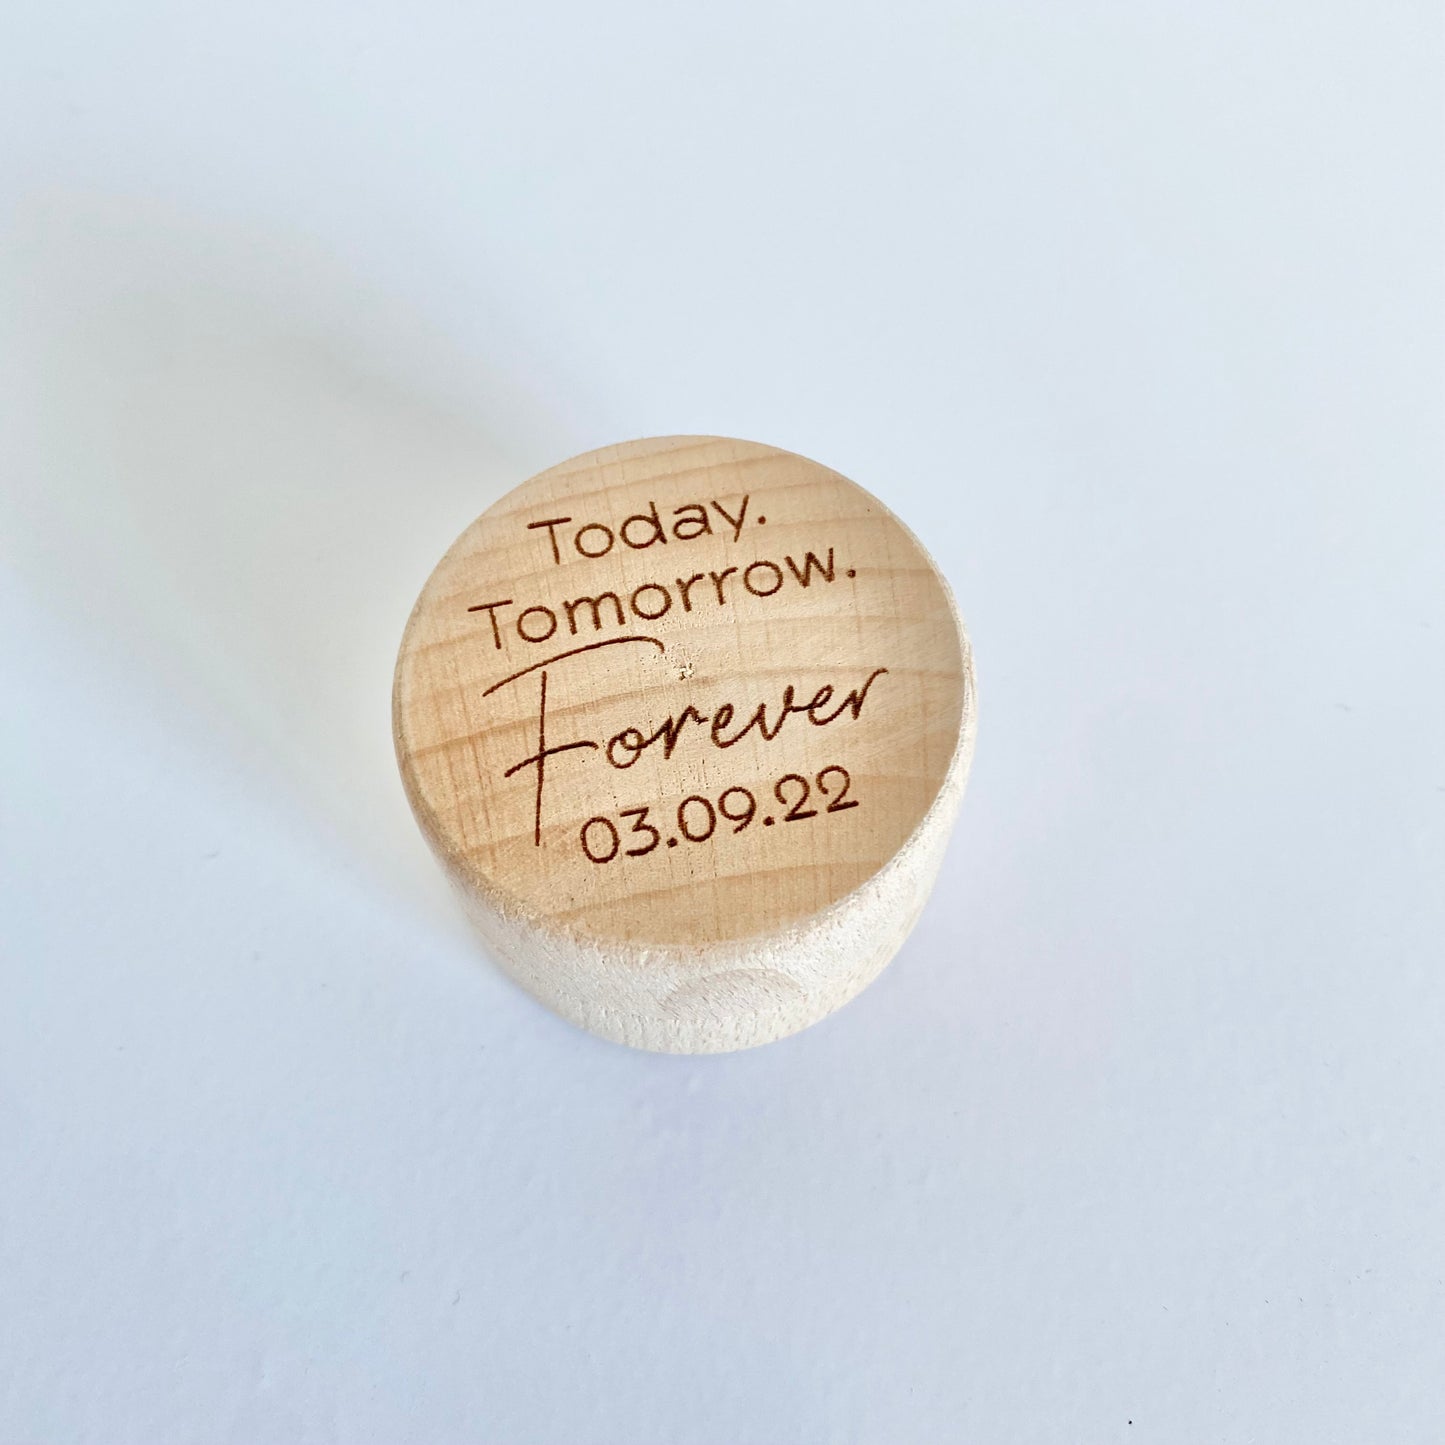 Today Tomorrow Forever ring box